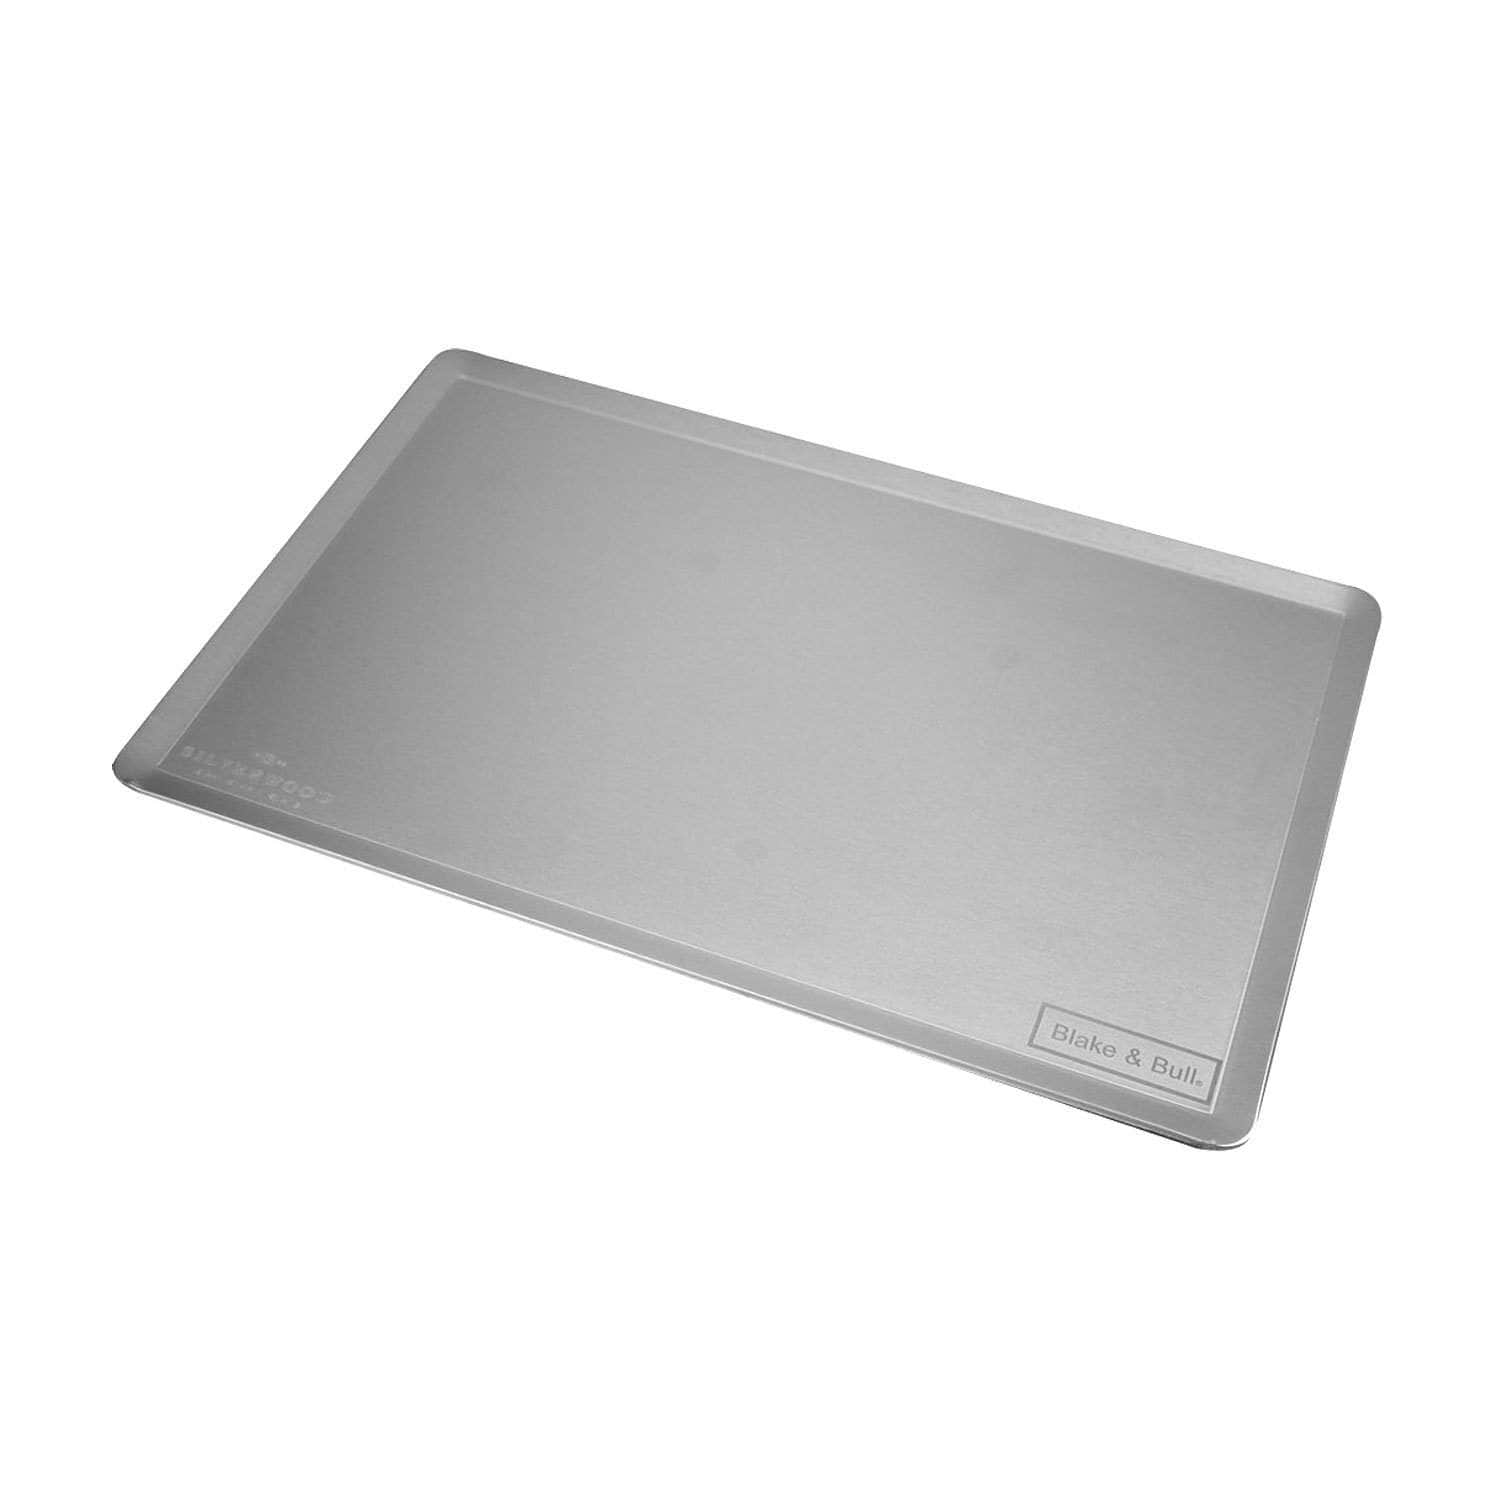 Premium cold shelf & baking sheet for use with Aga range cooker